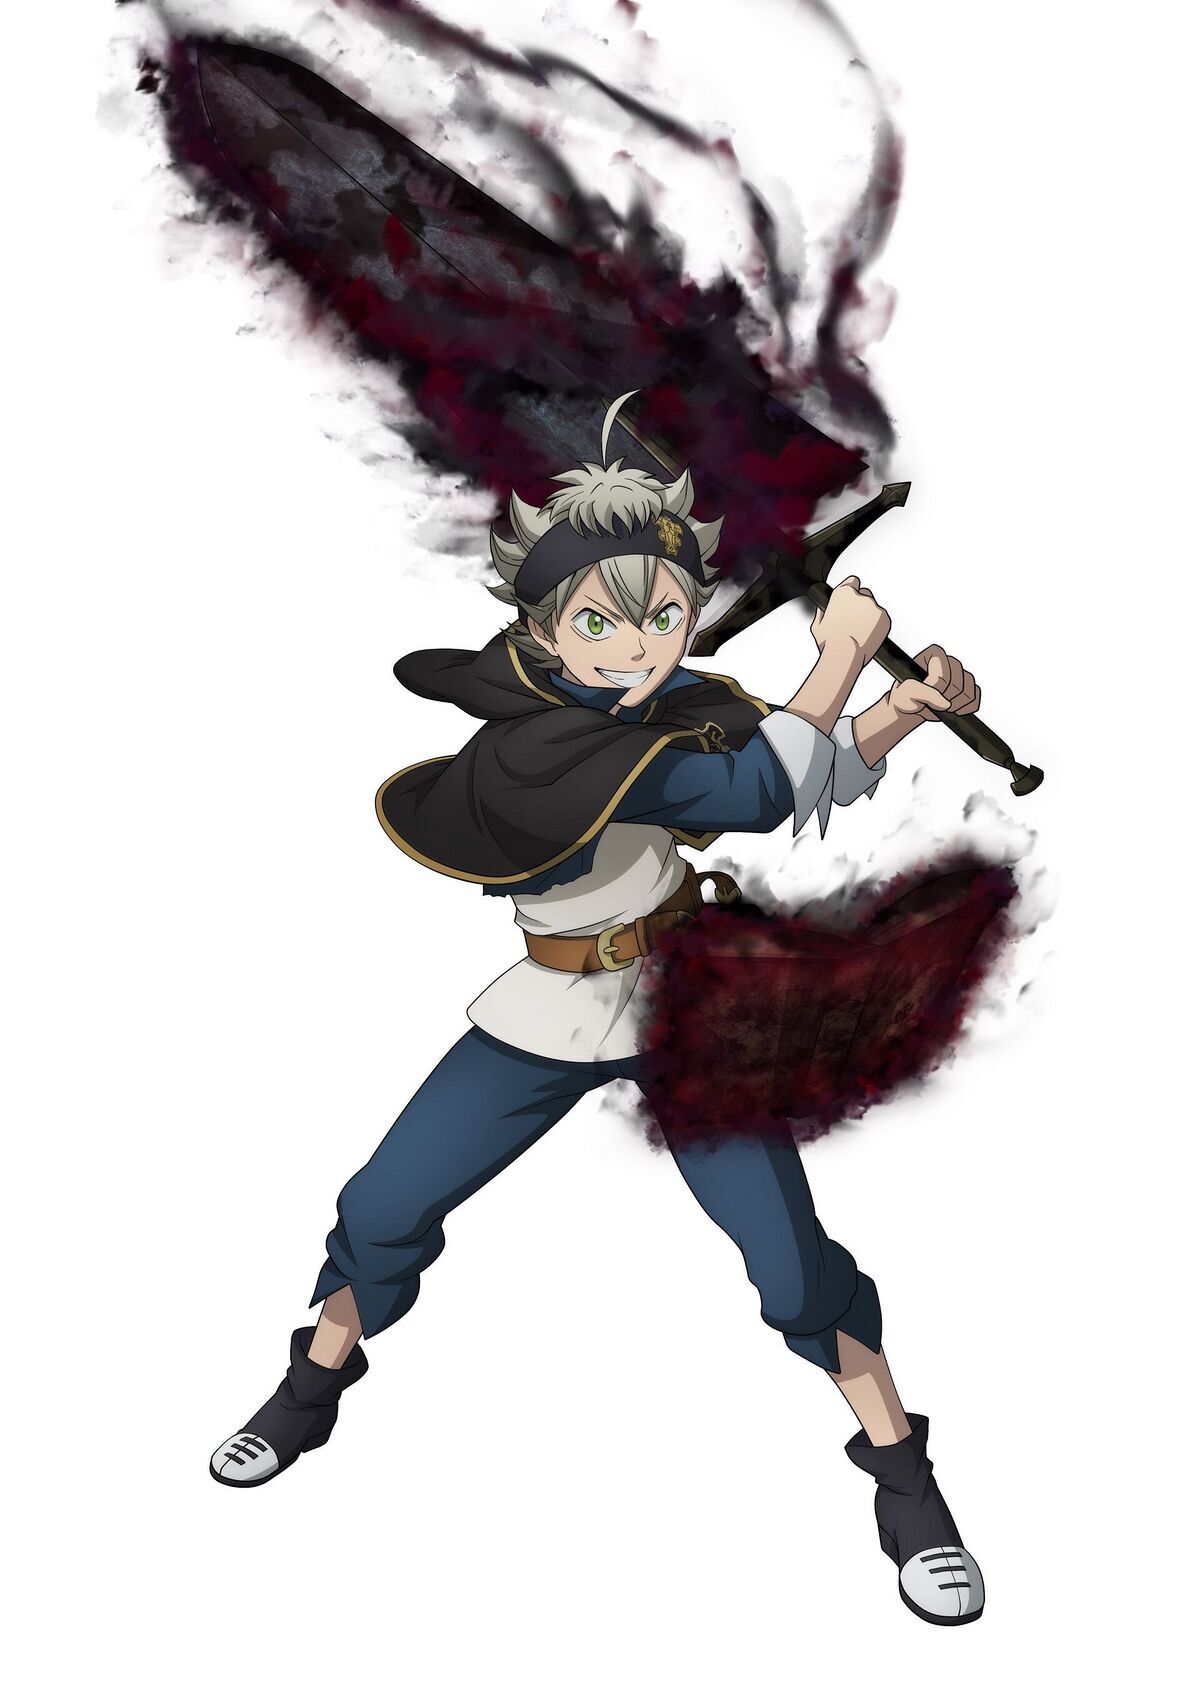 NEW* FREE CODES Anime Journey gives FREE Spins + Black Clover Update!  Trying to get Magna or Luck! 